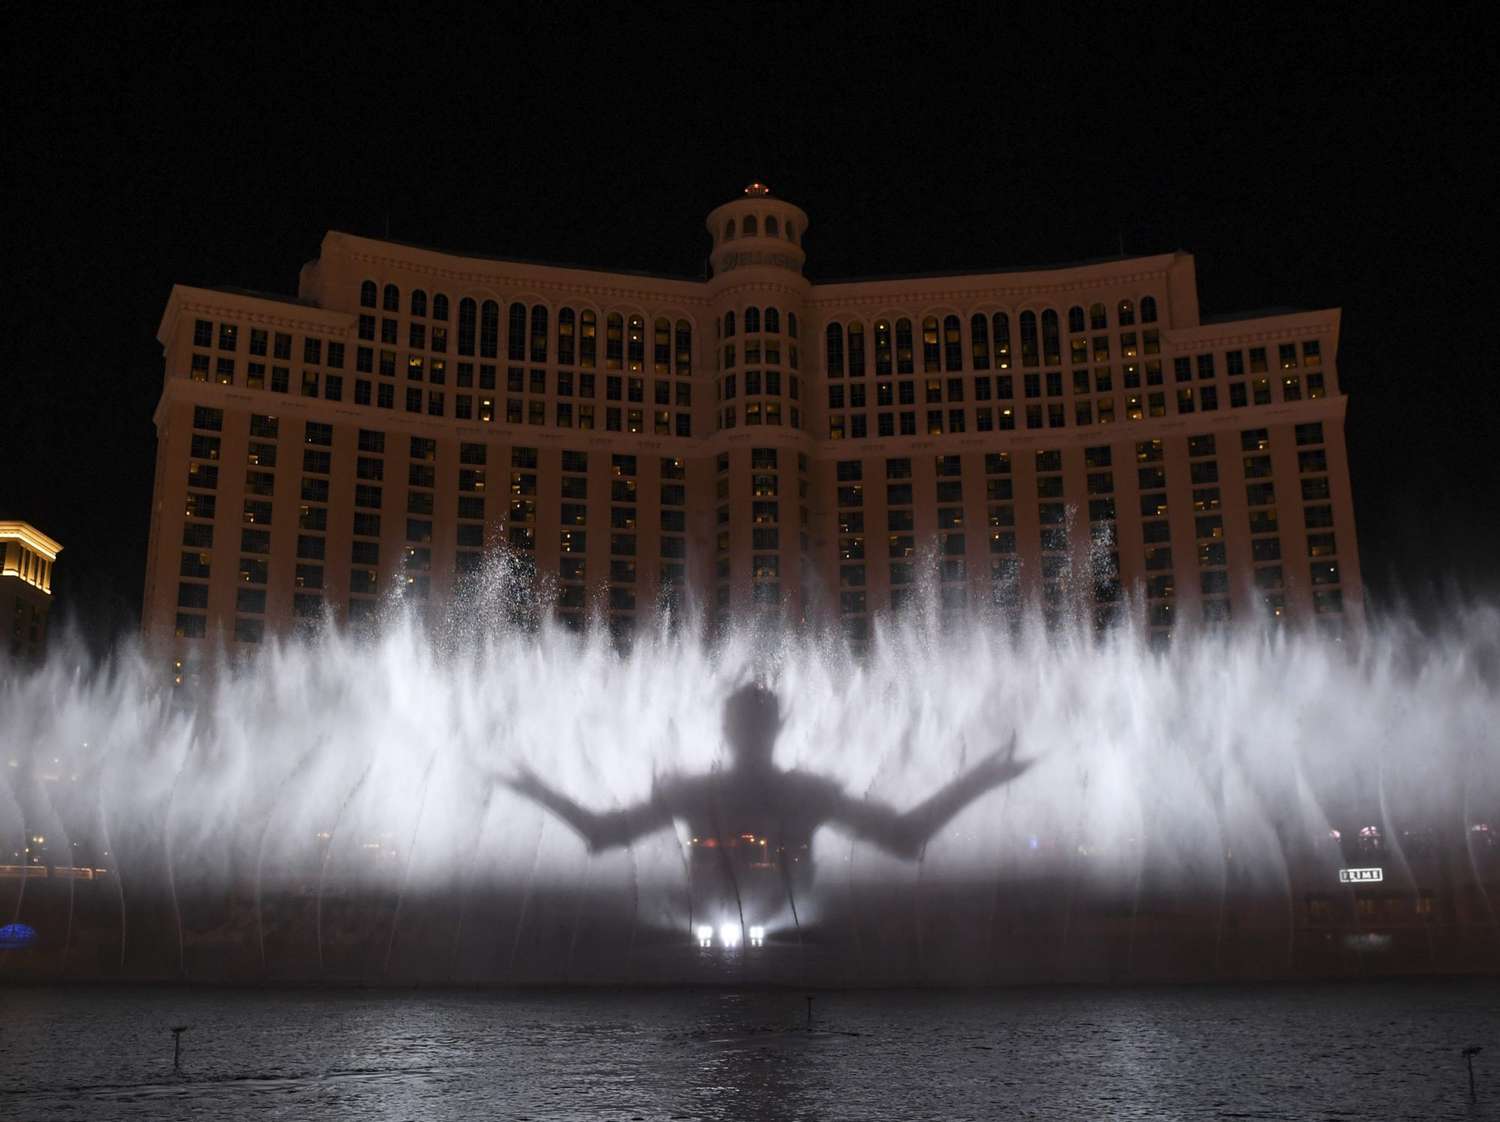 HBO, MGM Resorts And WET Design Debut Exclusive Game Of Thrones Production On The Fountains Of Bellagio Through April 13